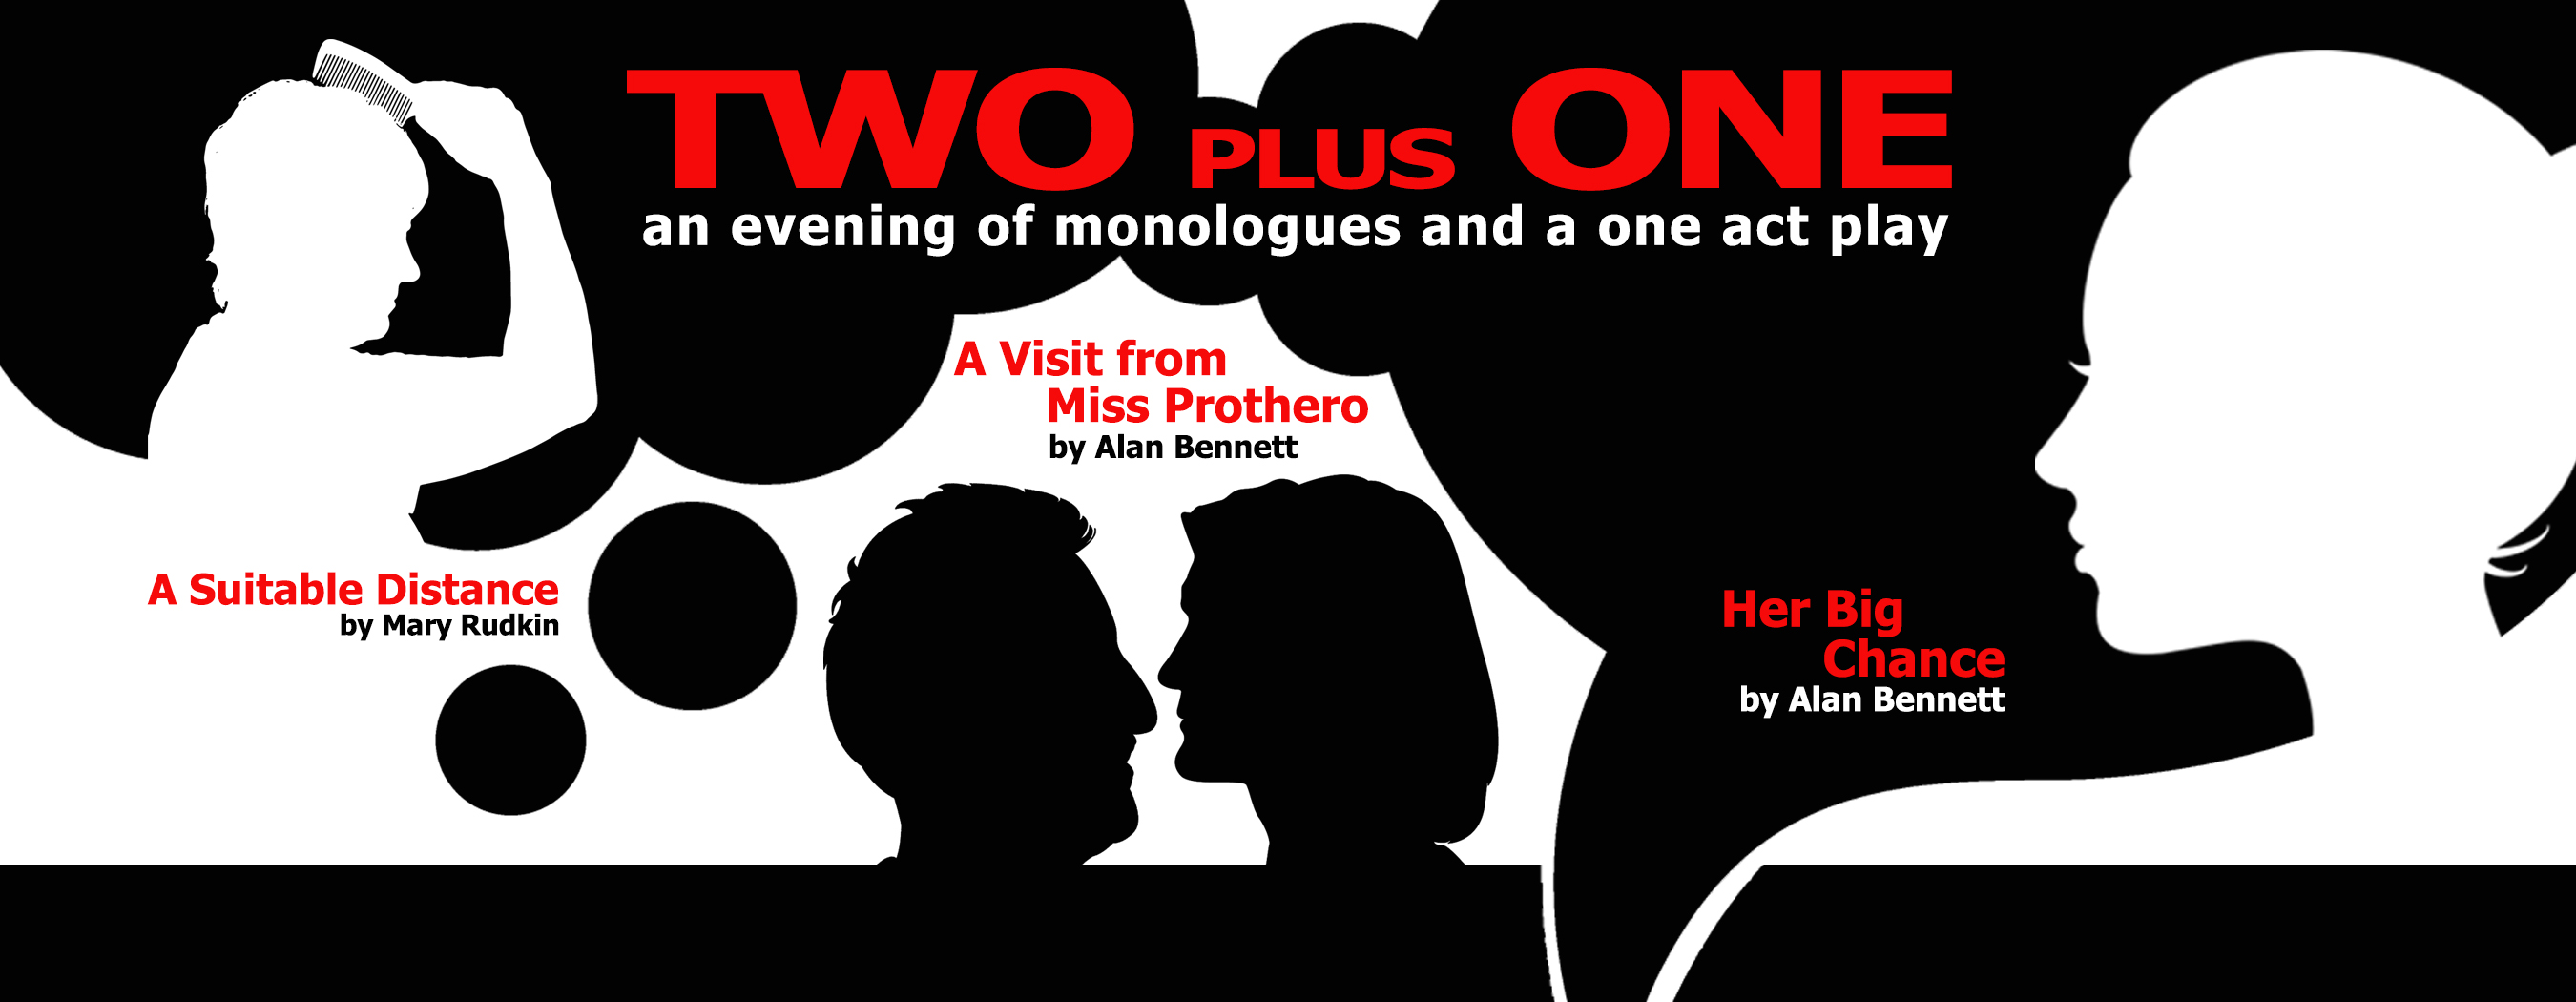 SLT to perform original monologue and two Alan Bennett pieces to the Playhouse